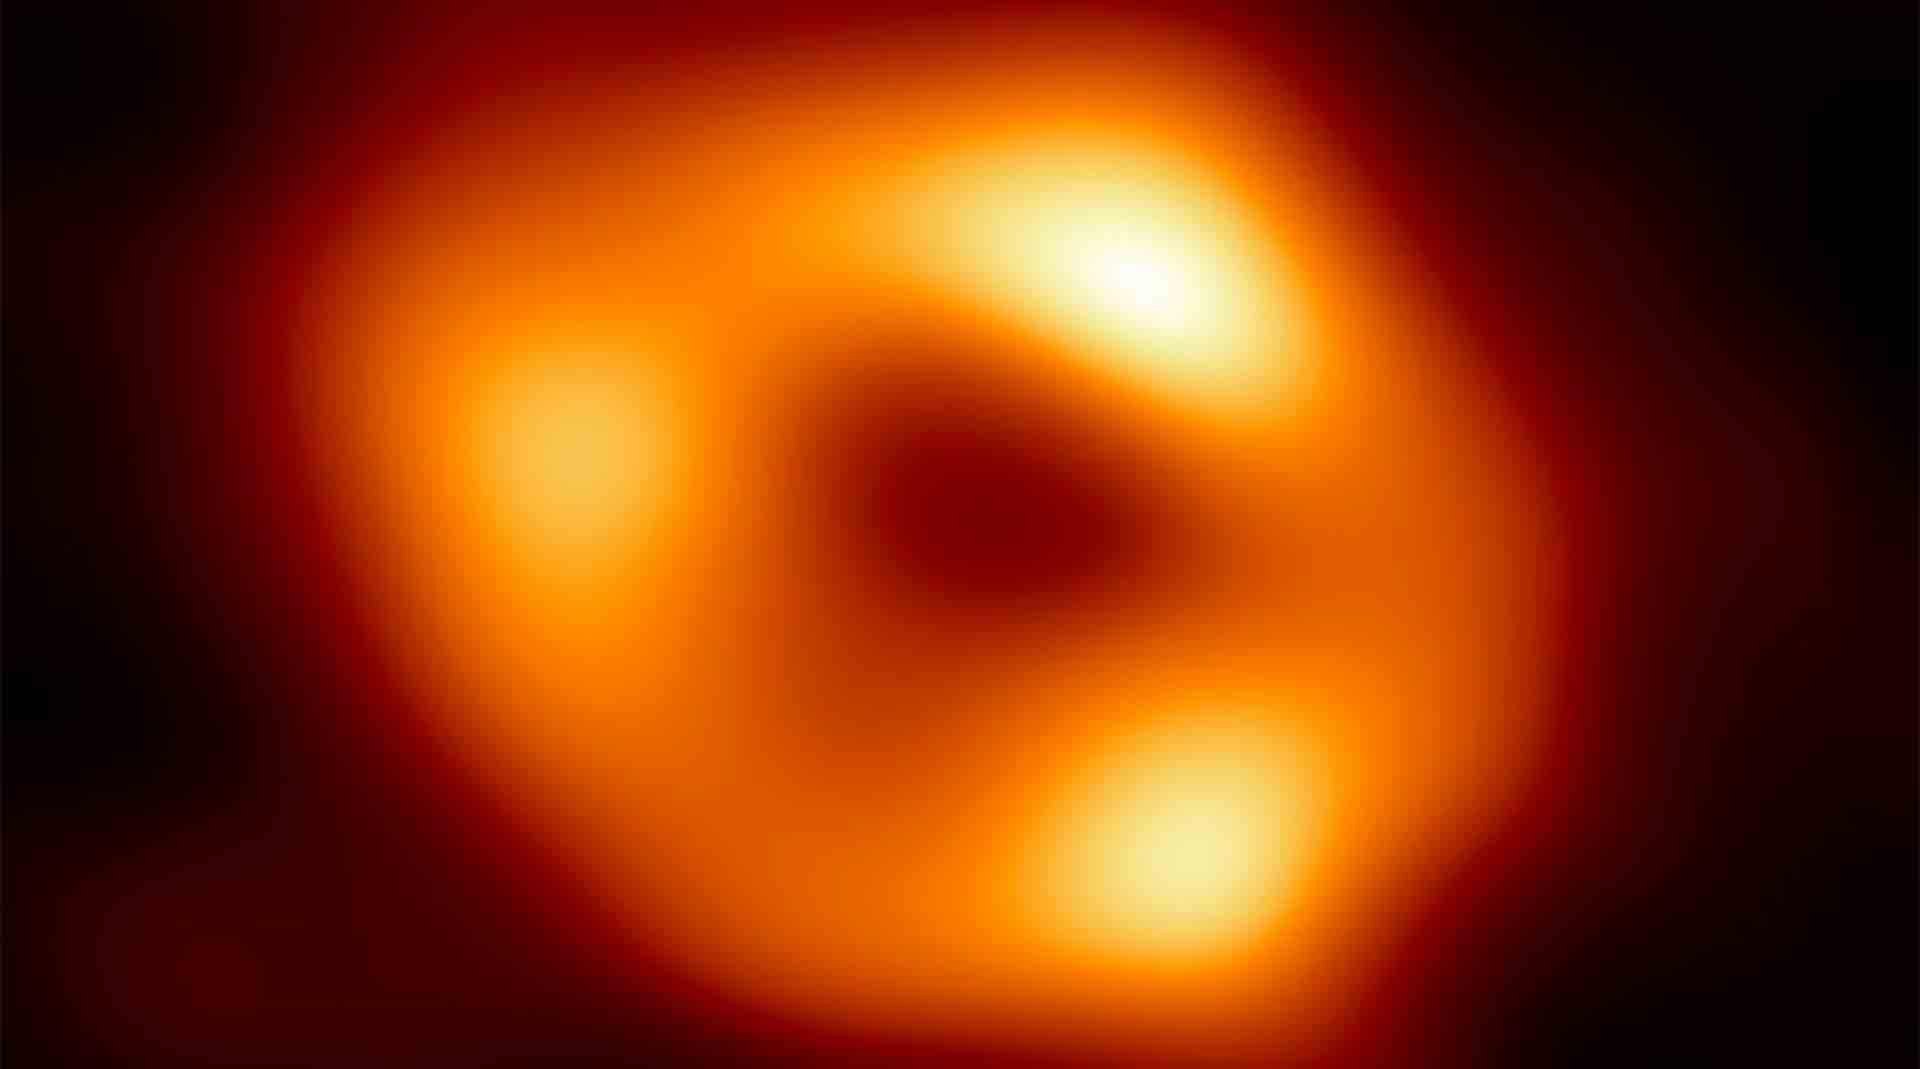 Episode 325: Detailing the image of the Milky Way’s black hole